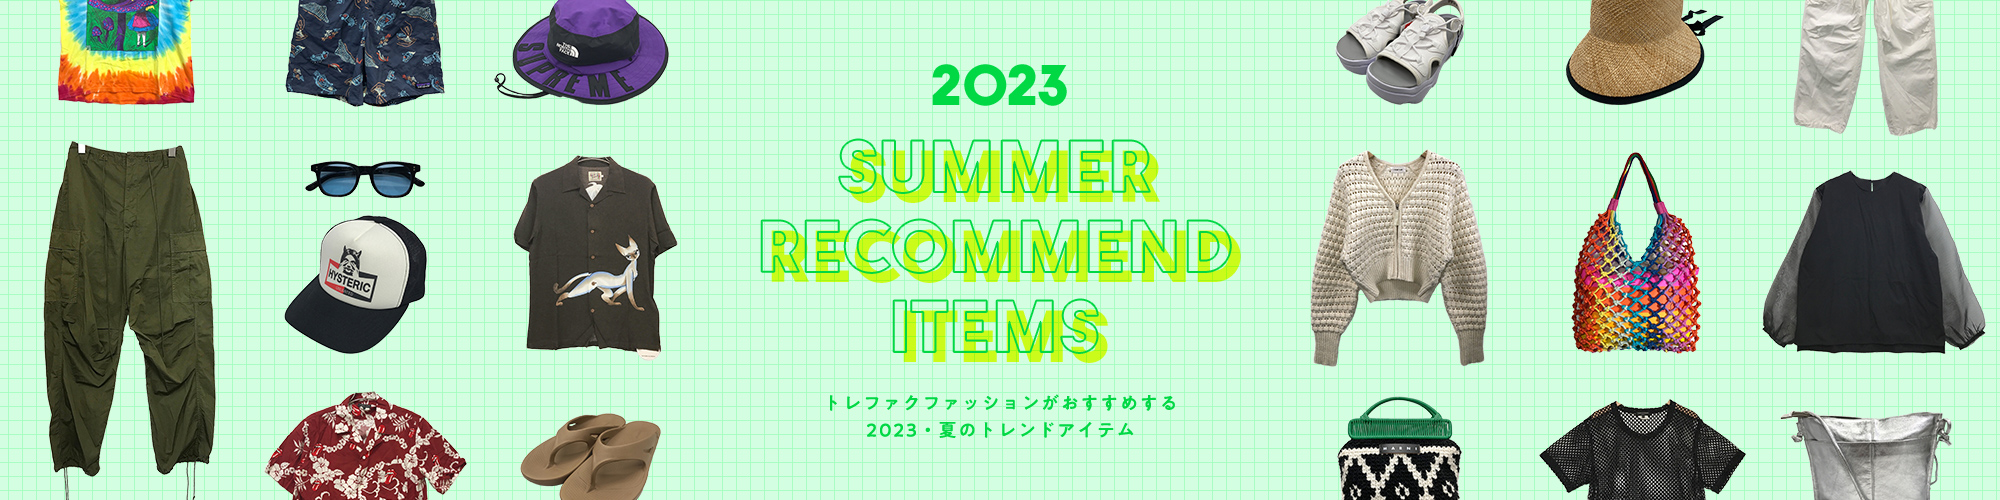 SUMMER RECOMMEND ITEMS特集